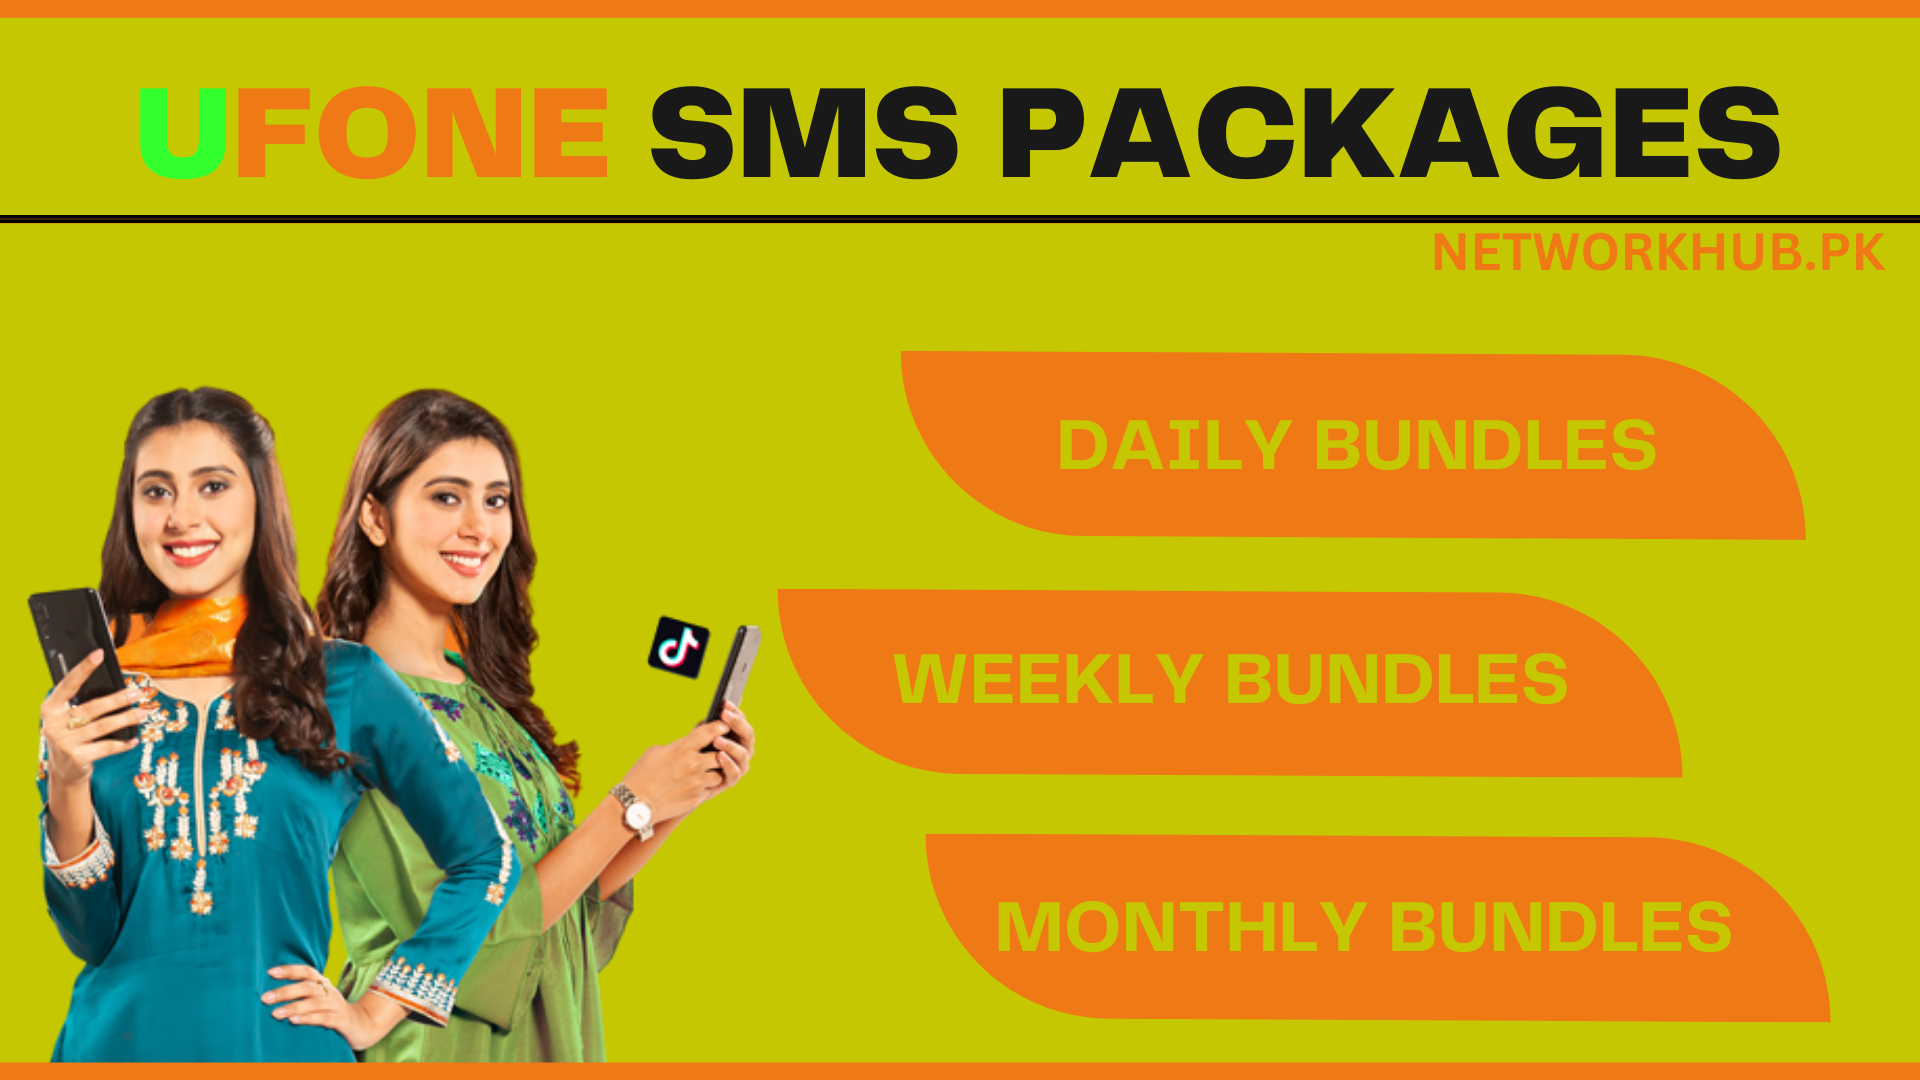 Ufone SMS Package - Network Hub